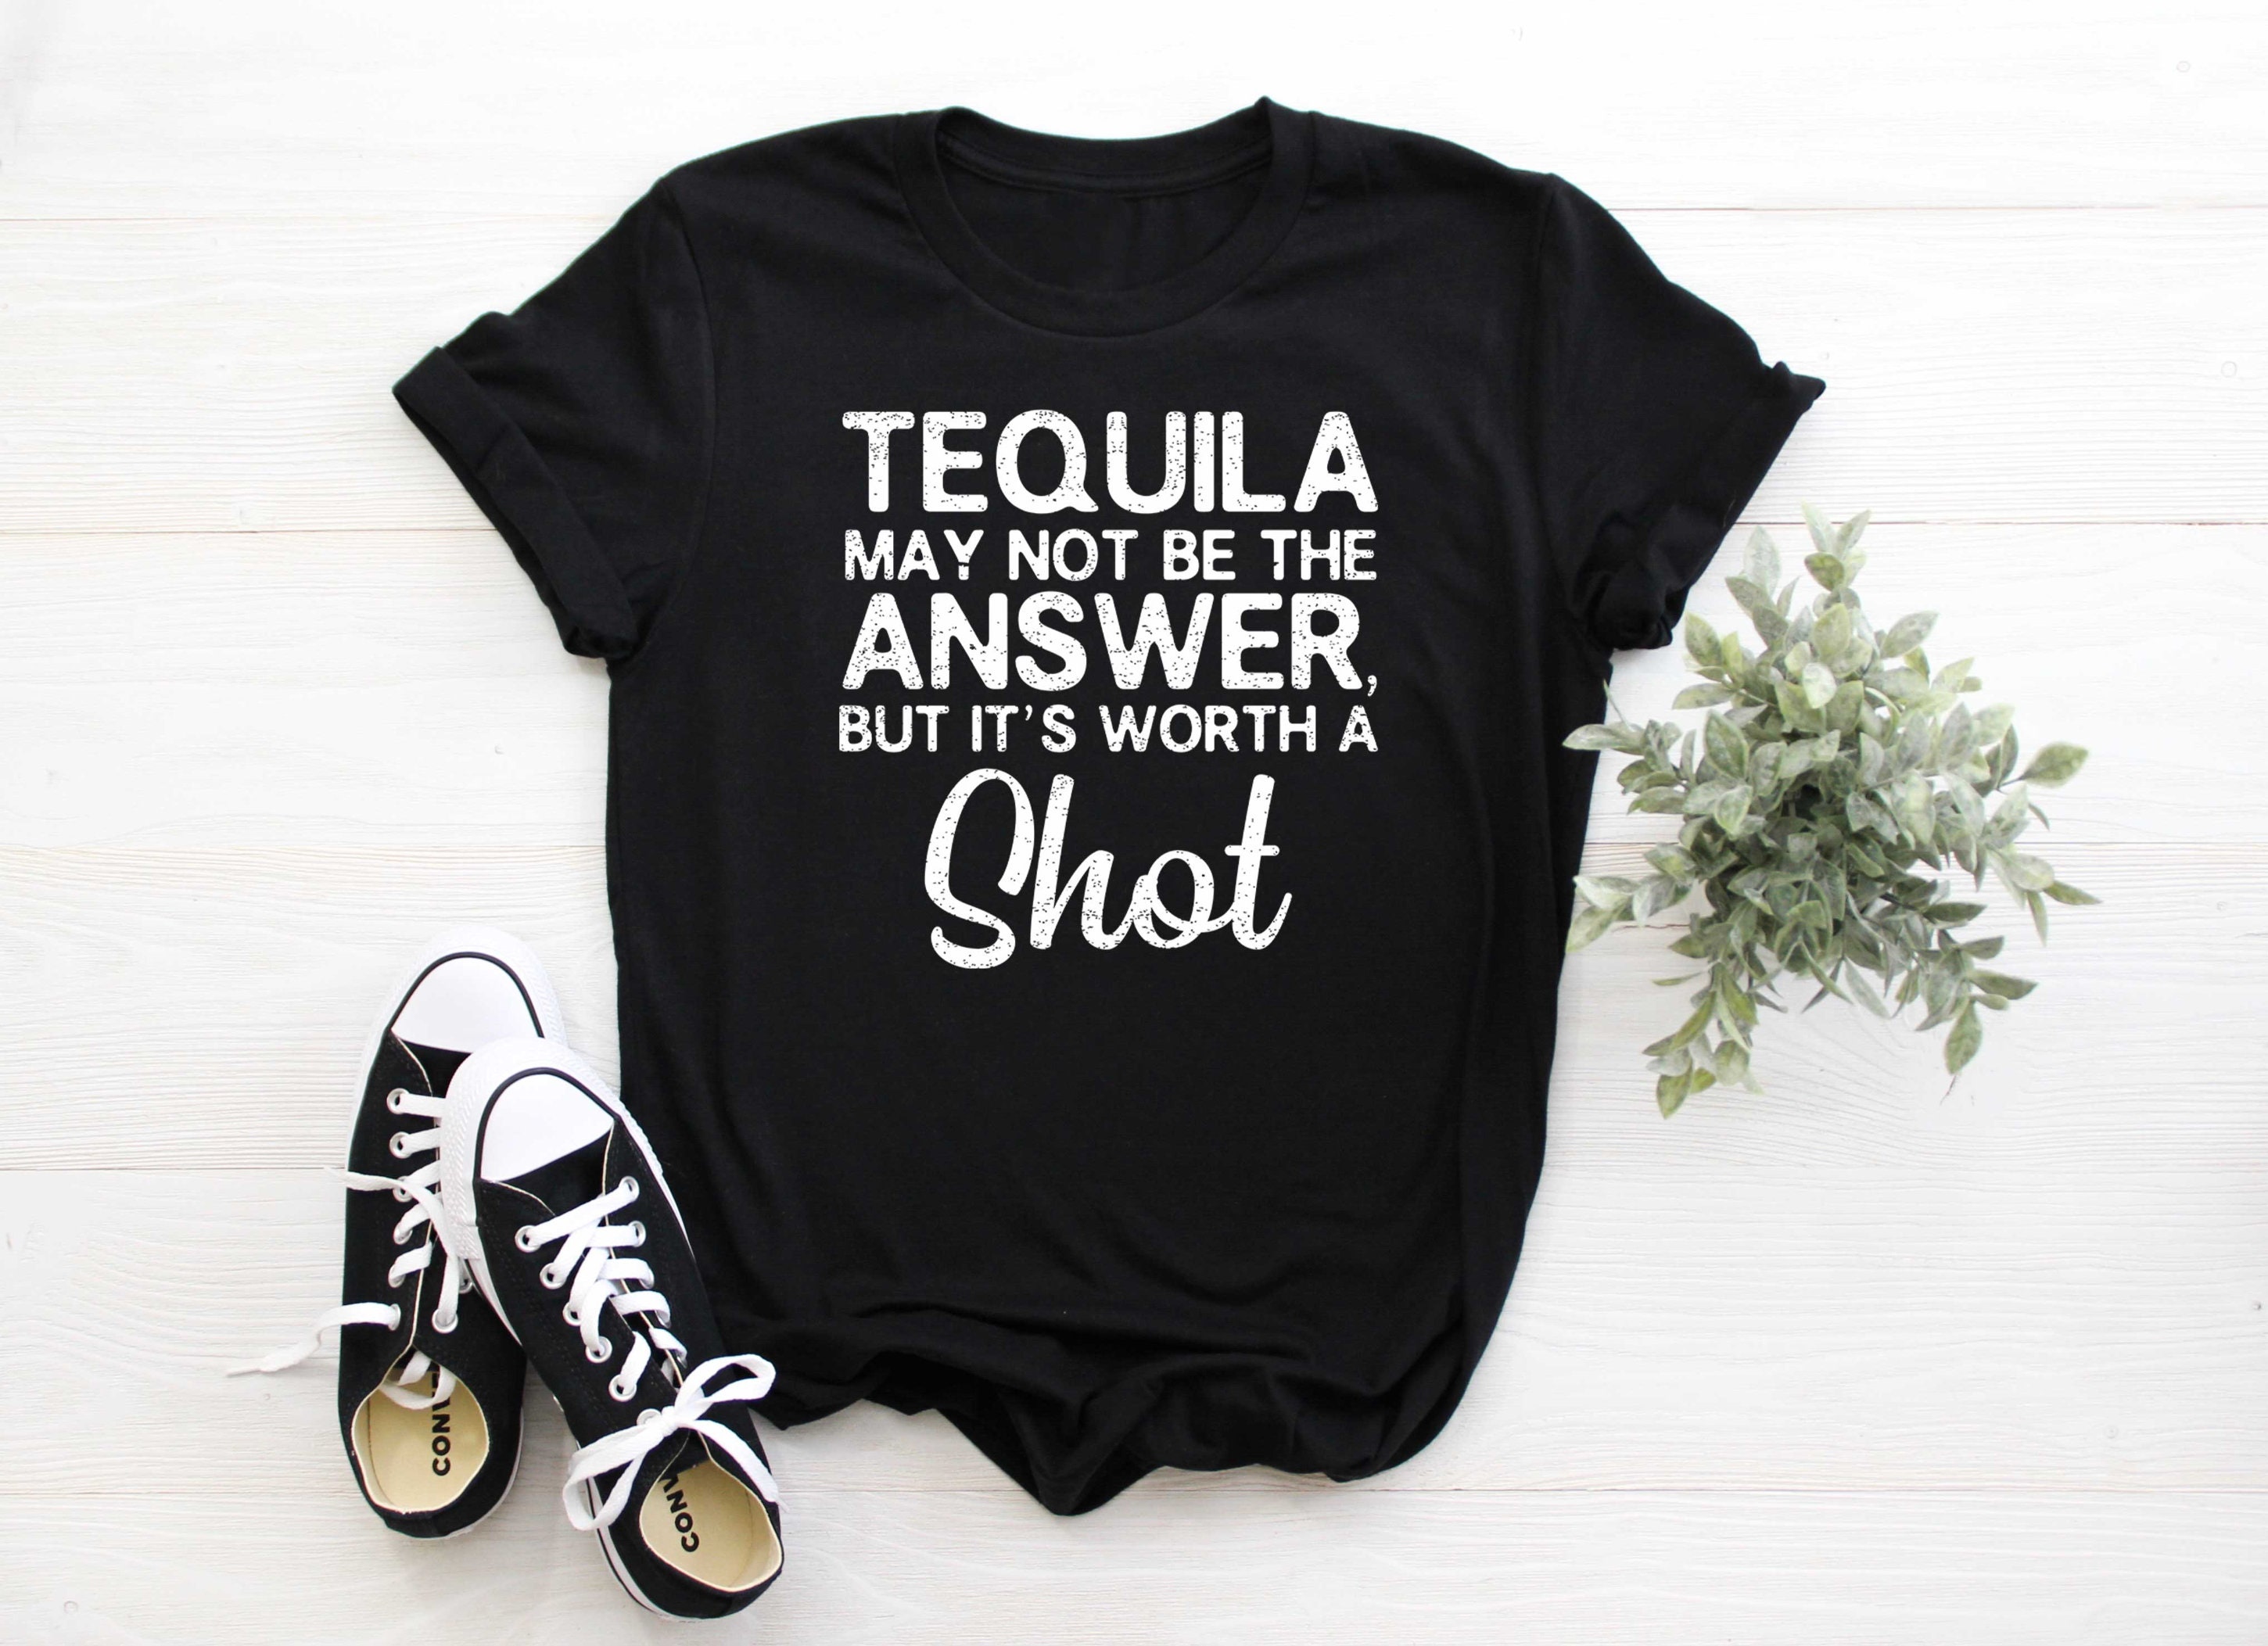 Tequila May Not Be the Answer but Worth A Shot Funny Shirt | Etsy